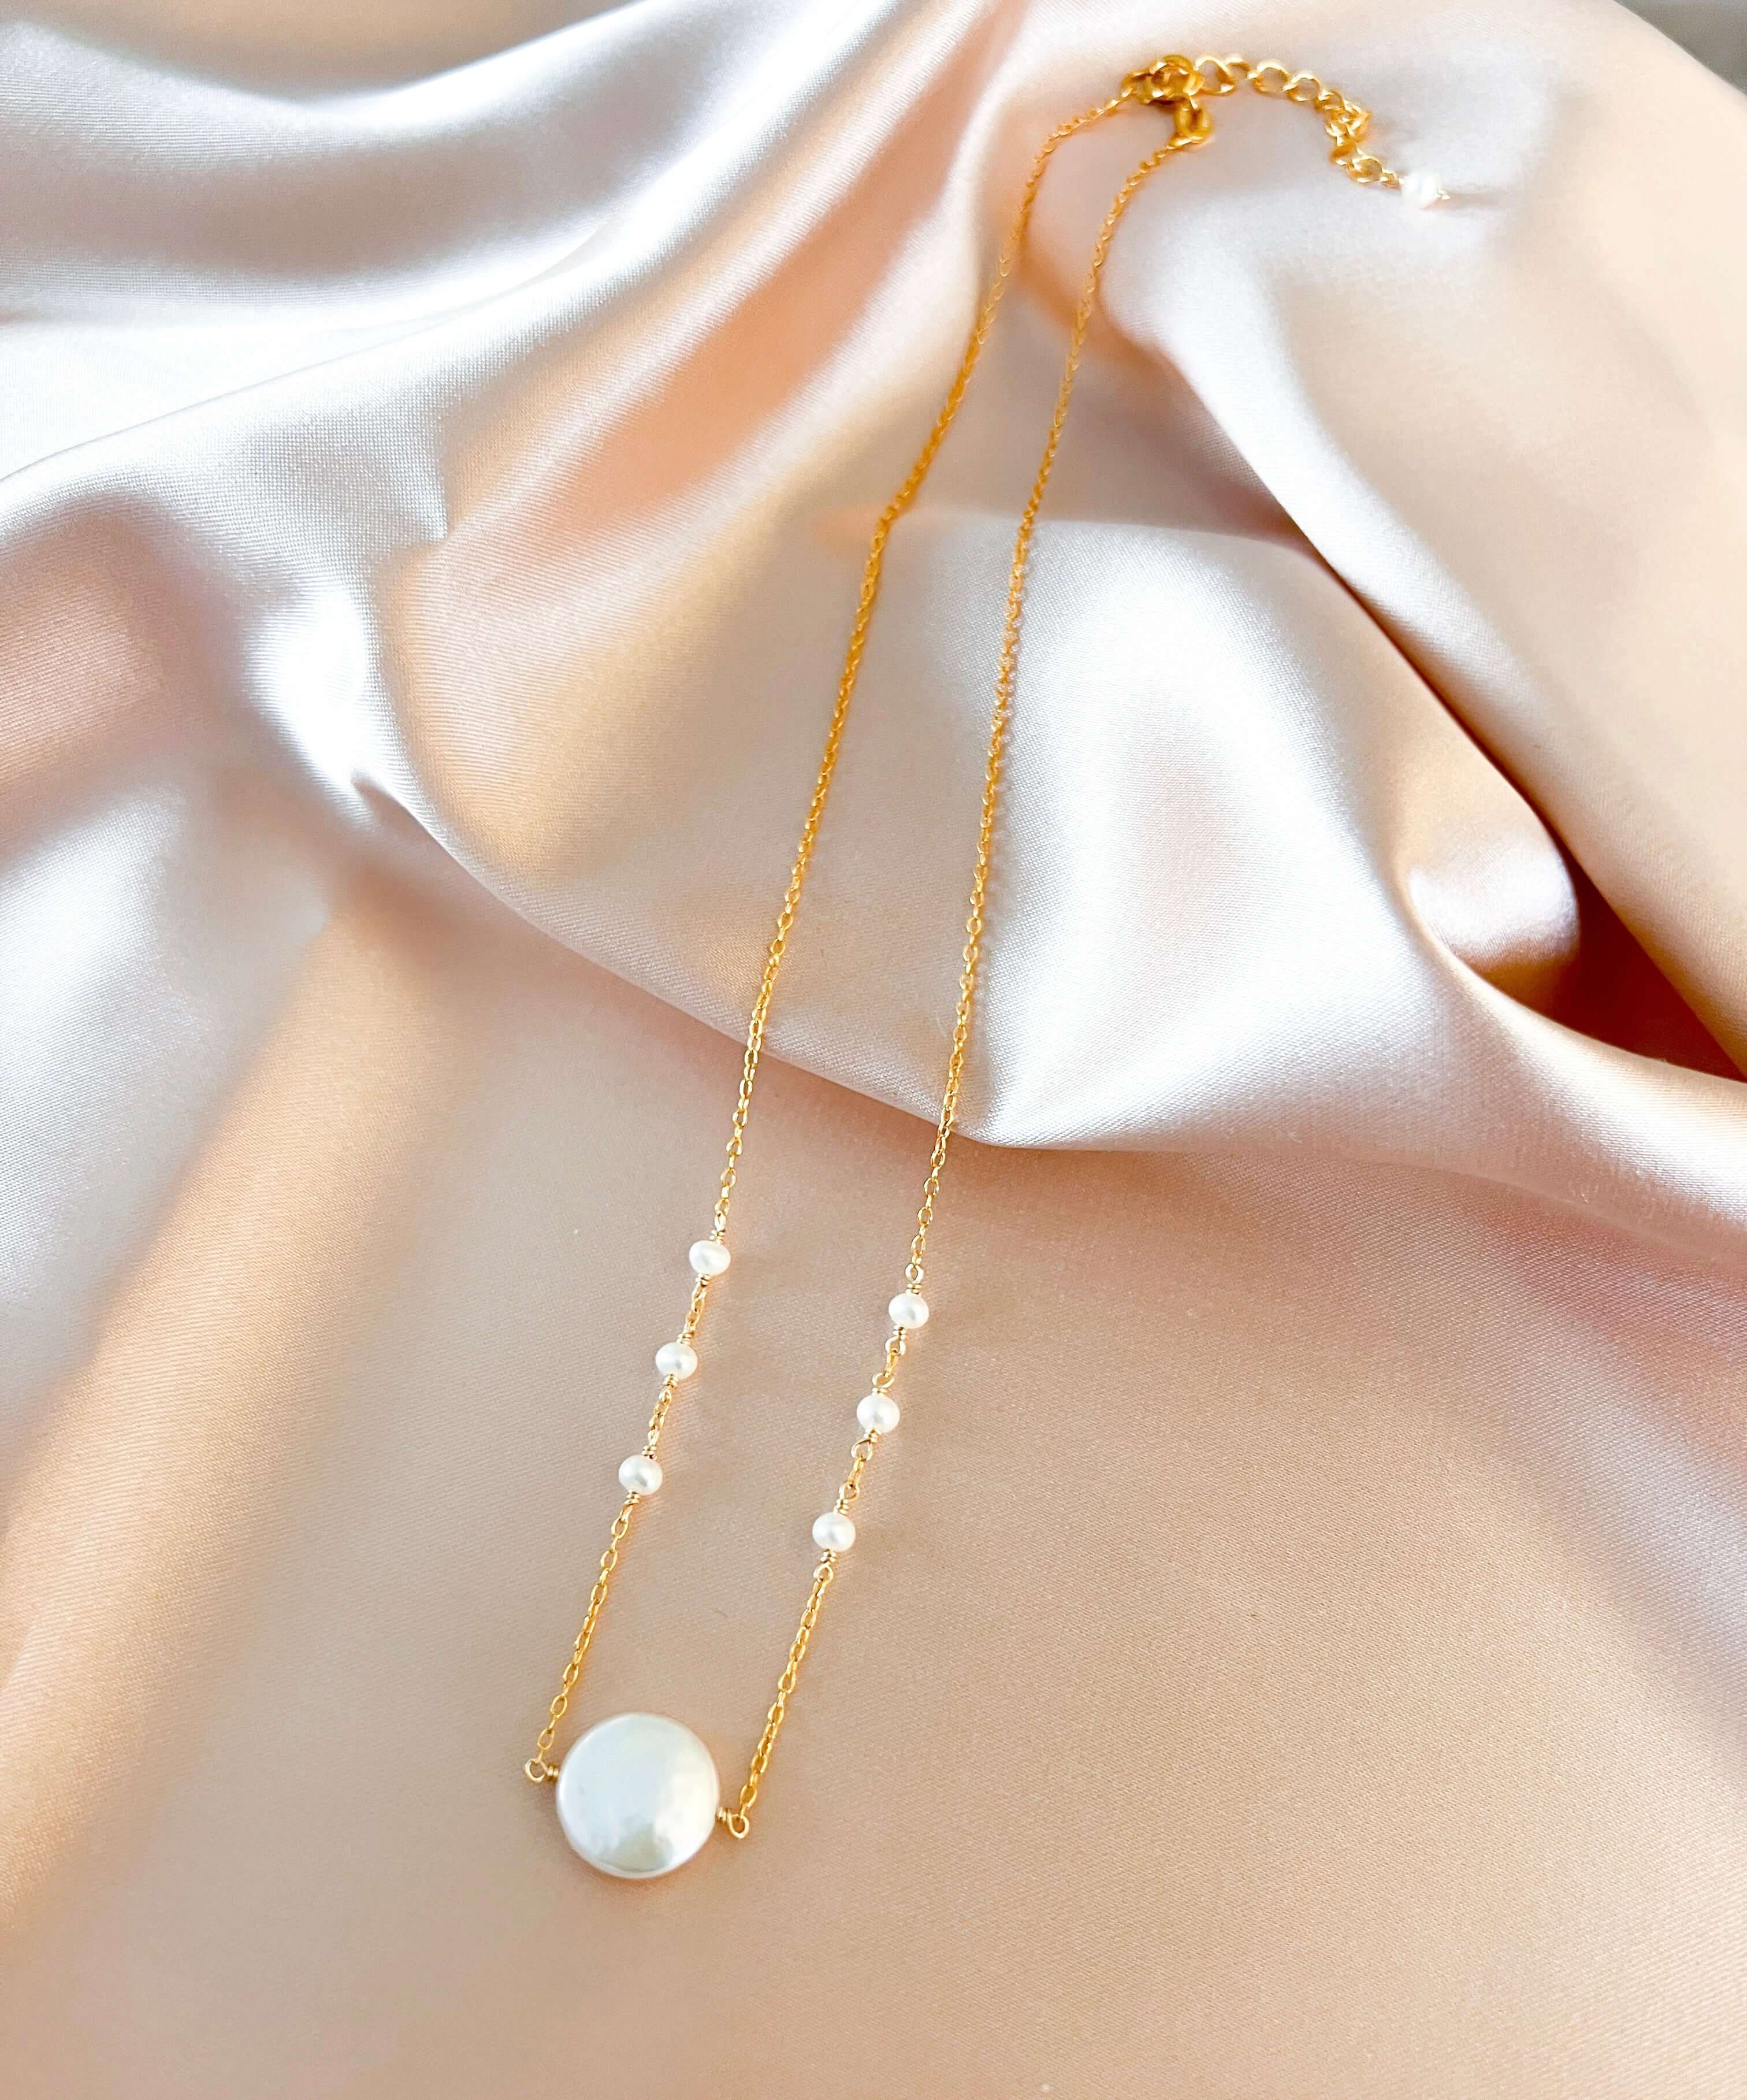 Lustrous Round Freshwater Coin Pearl Necklace in 14k Gold-Plated Chain